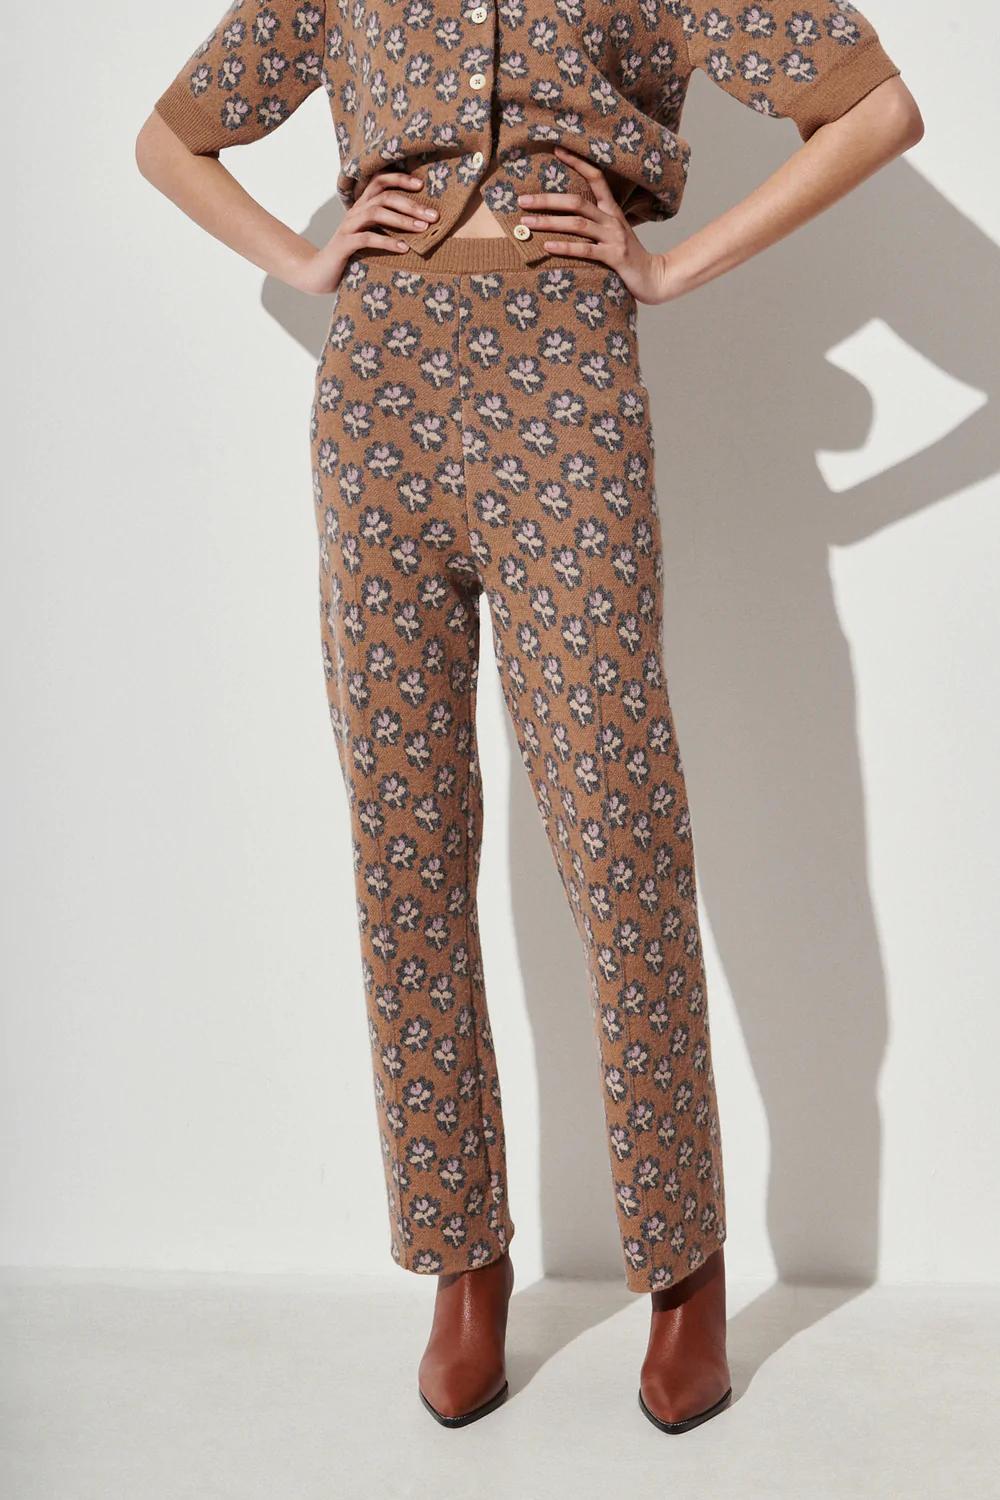 Product Image for Parado Pant, Camel